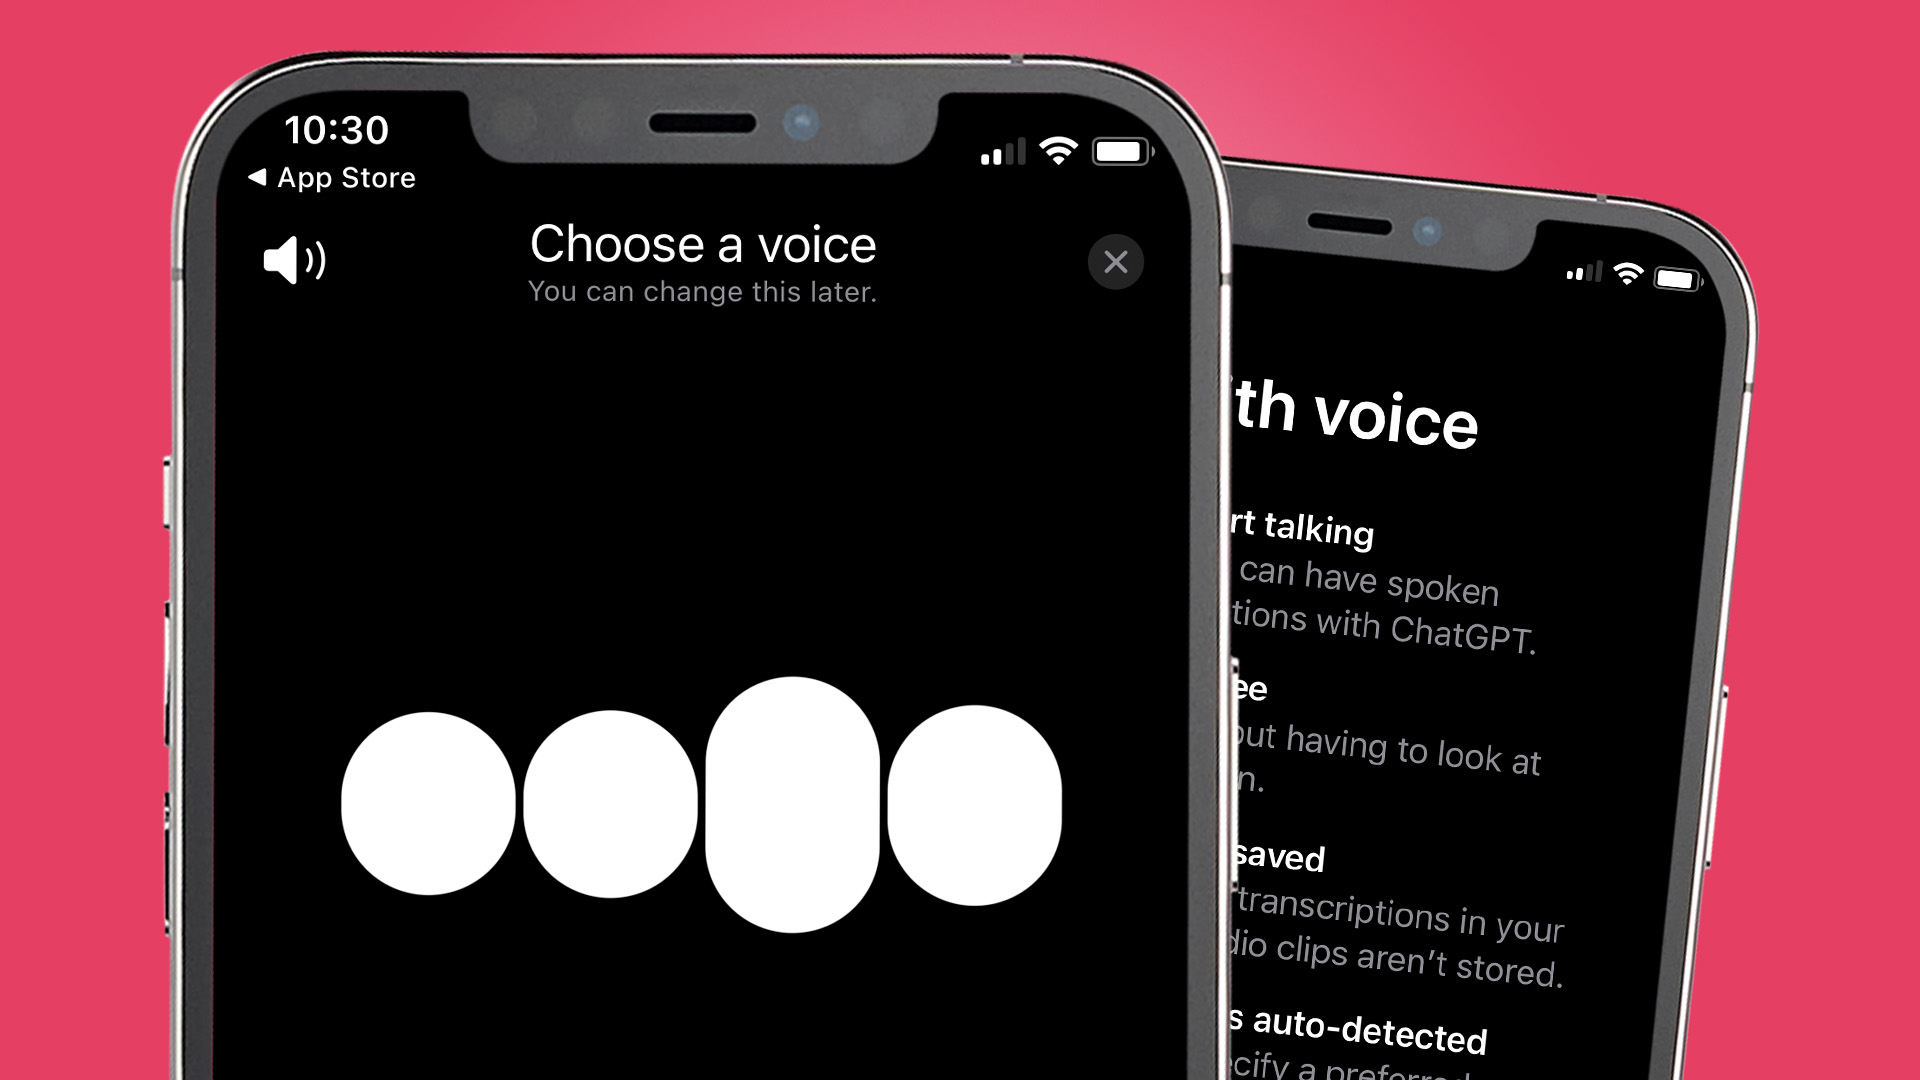 Now you can chat with ChatGPT using your voice